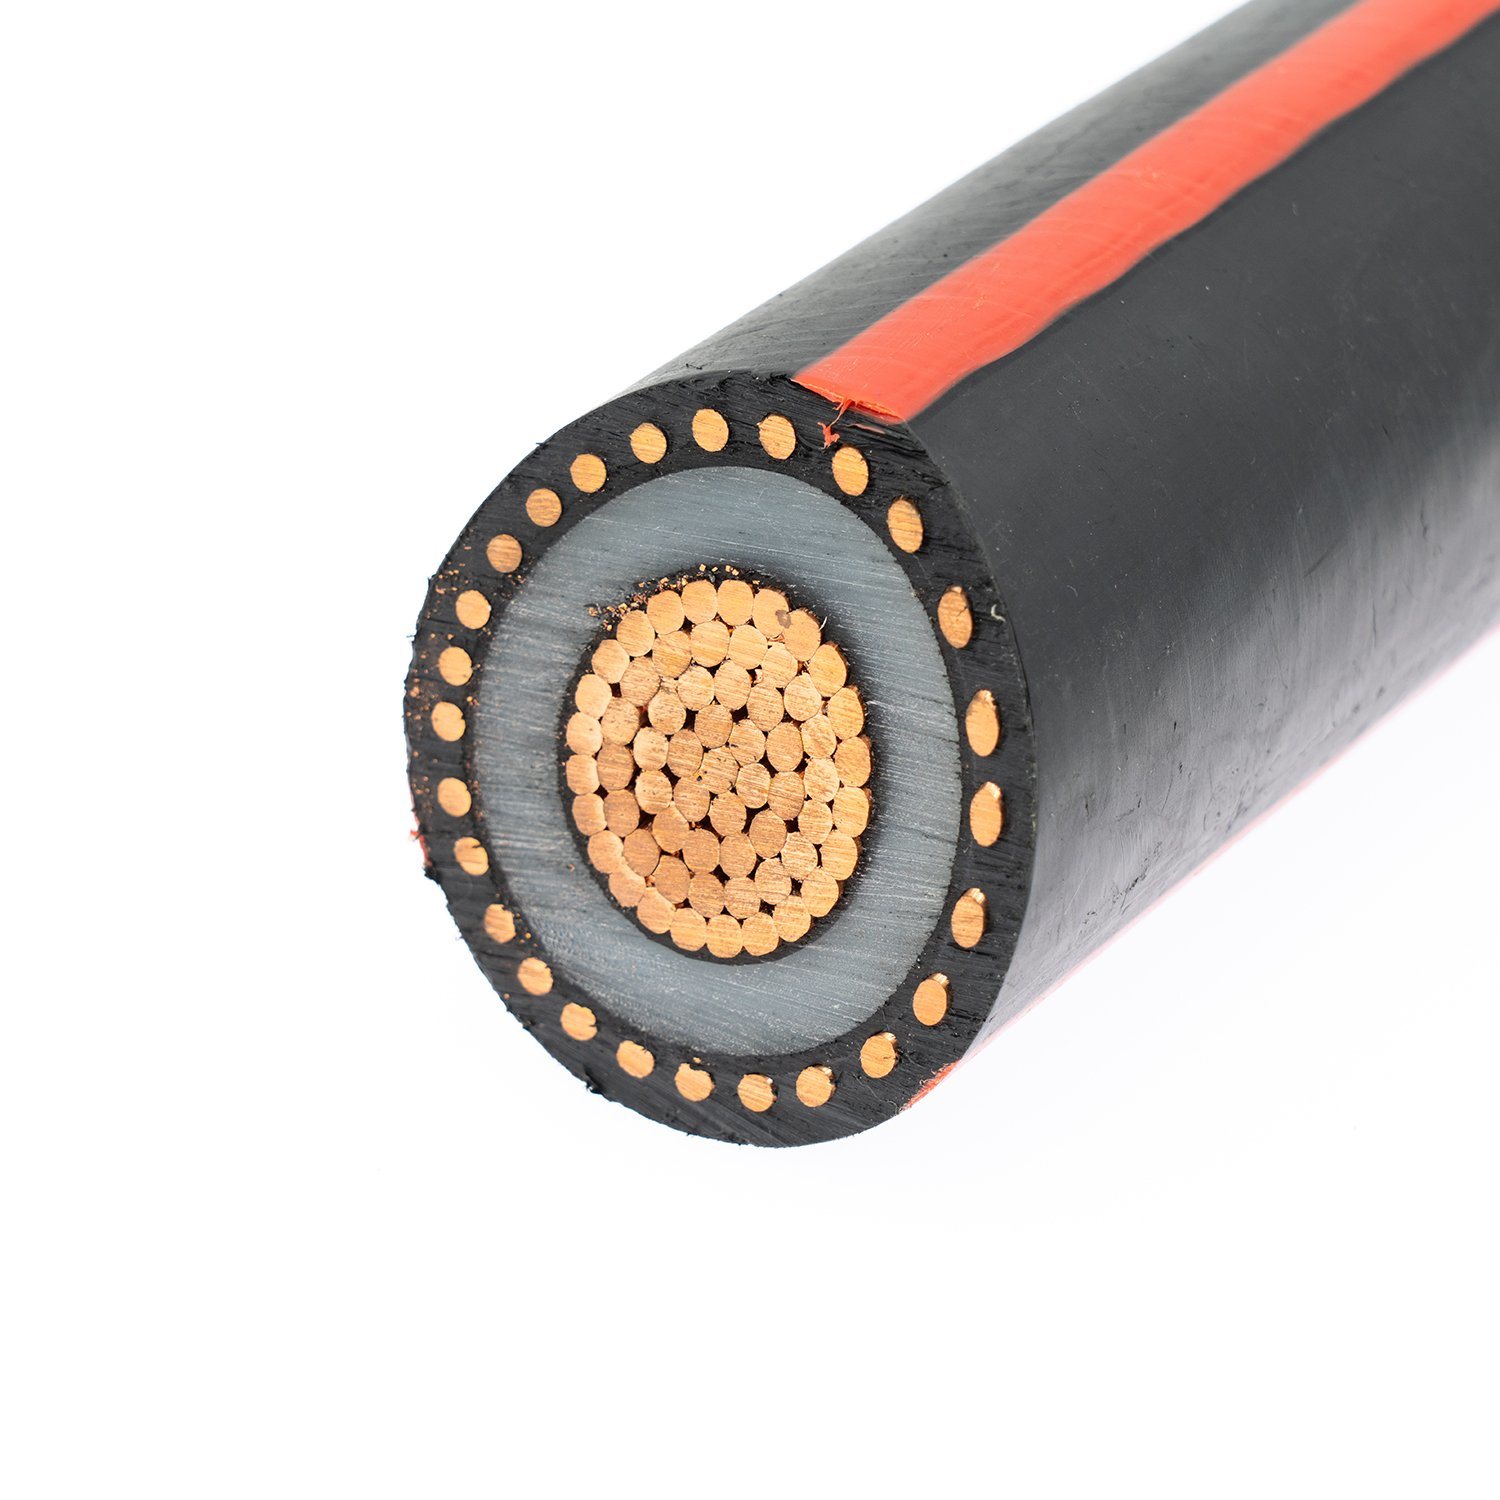 UL1072 Standard Urd Medium Voltage Power Cables Al Conductor Tr-XLPE or Epr Insulated Primary 25kv